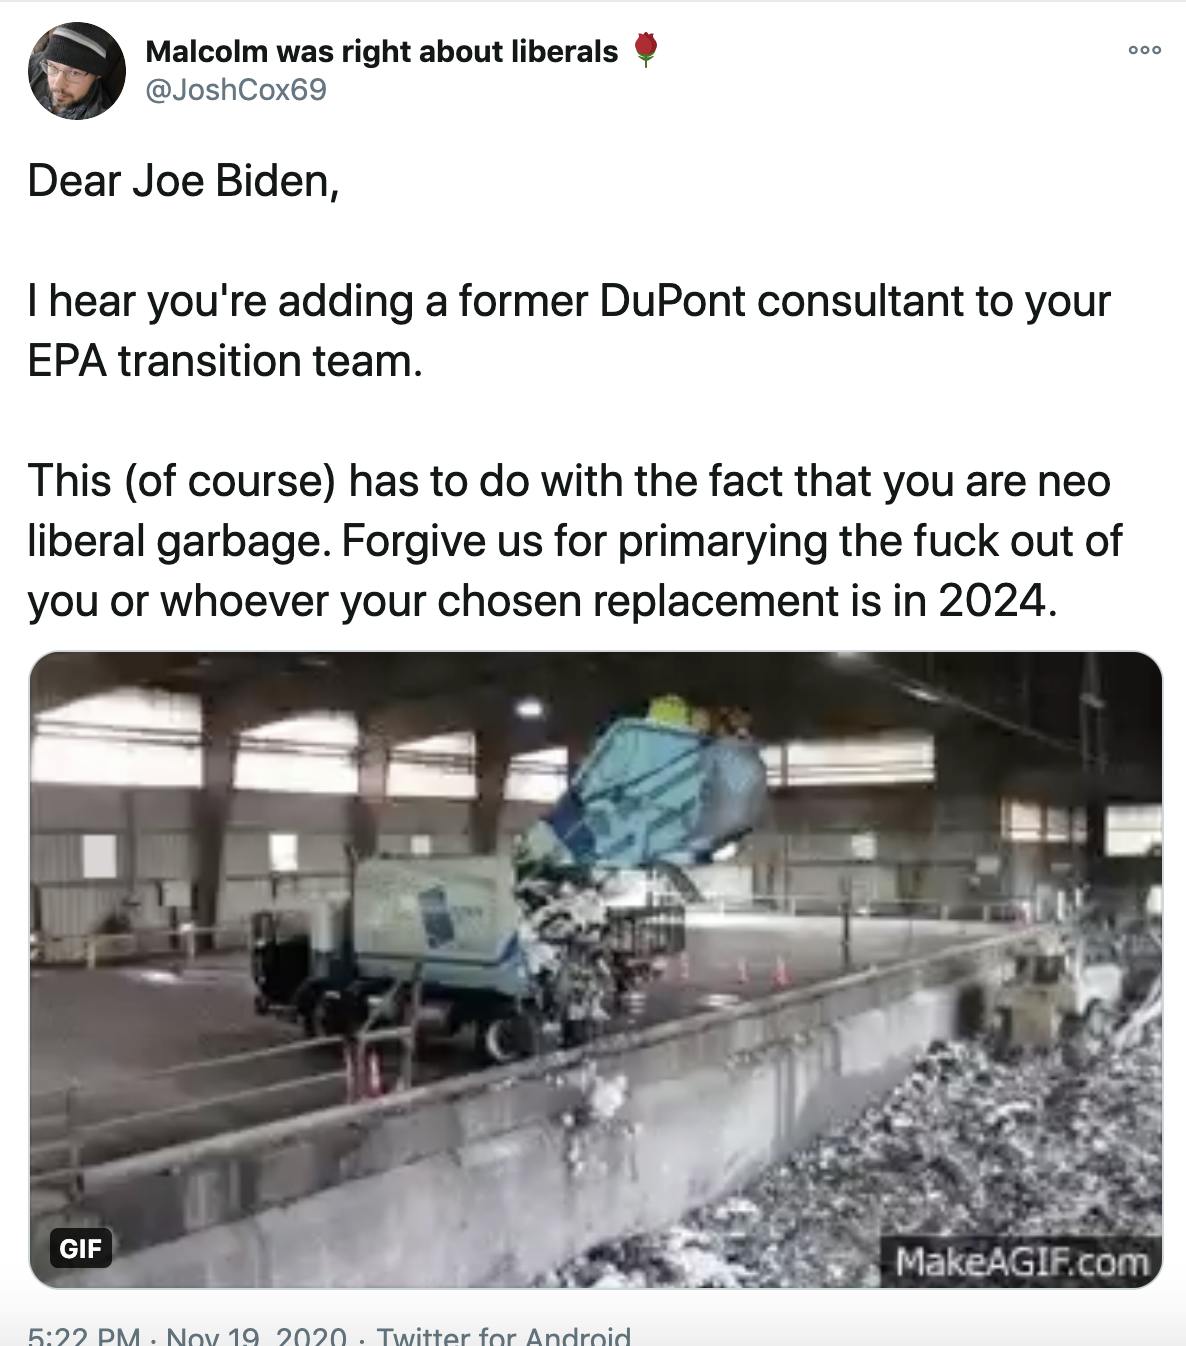 'Dear Joe Biden, I hear you're adding a former DuPont consultant to your EPA transition team. This (of course) has to do with the fact that you are neo liberal garbage. Forgive us for primarying the fuck out of you or whoever your chosen replacement is in 2024.' gif of a truck dumping trash in a landfill